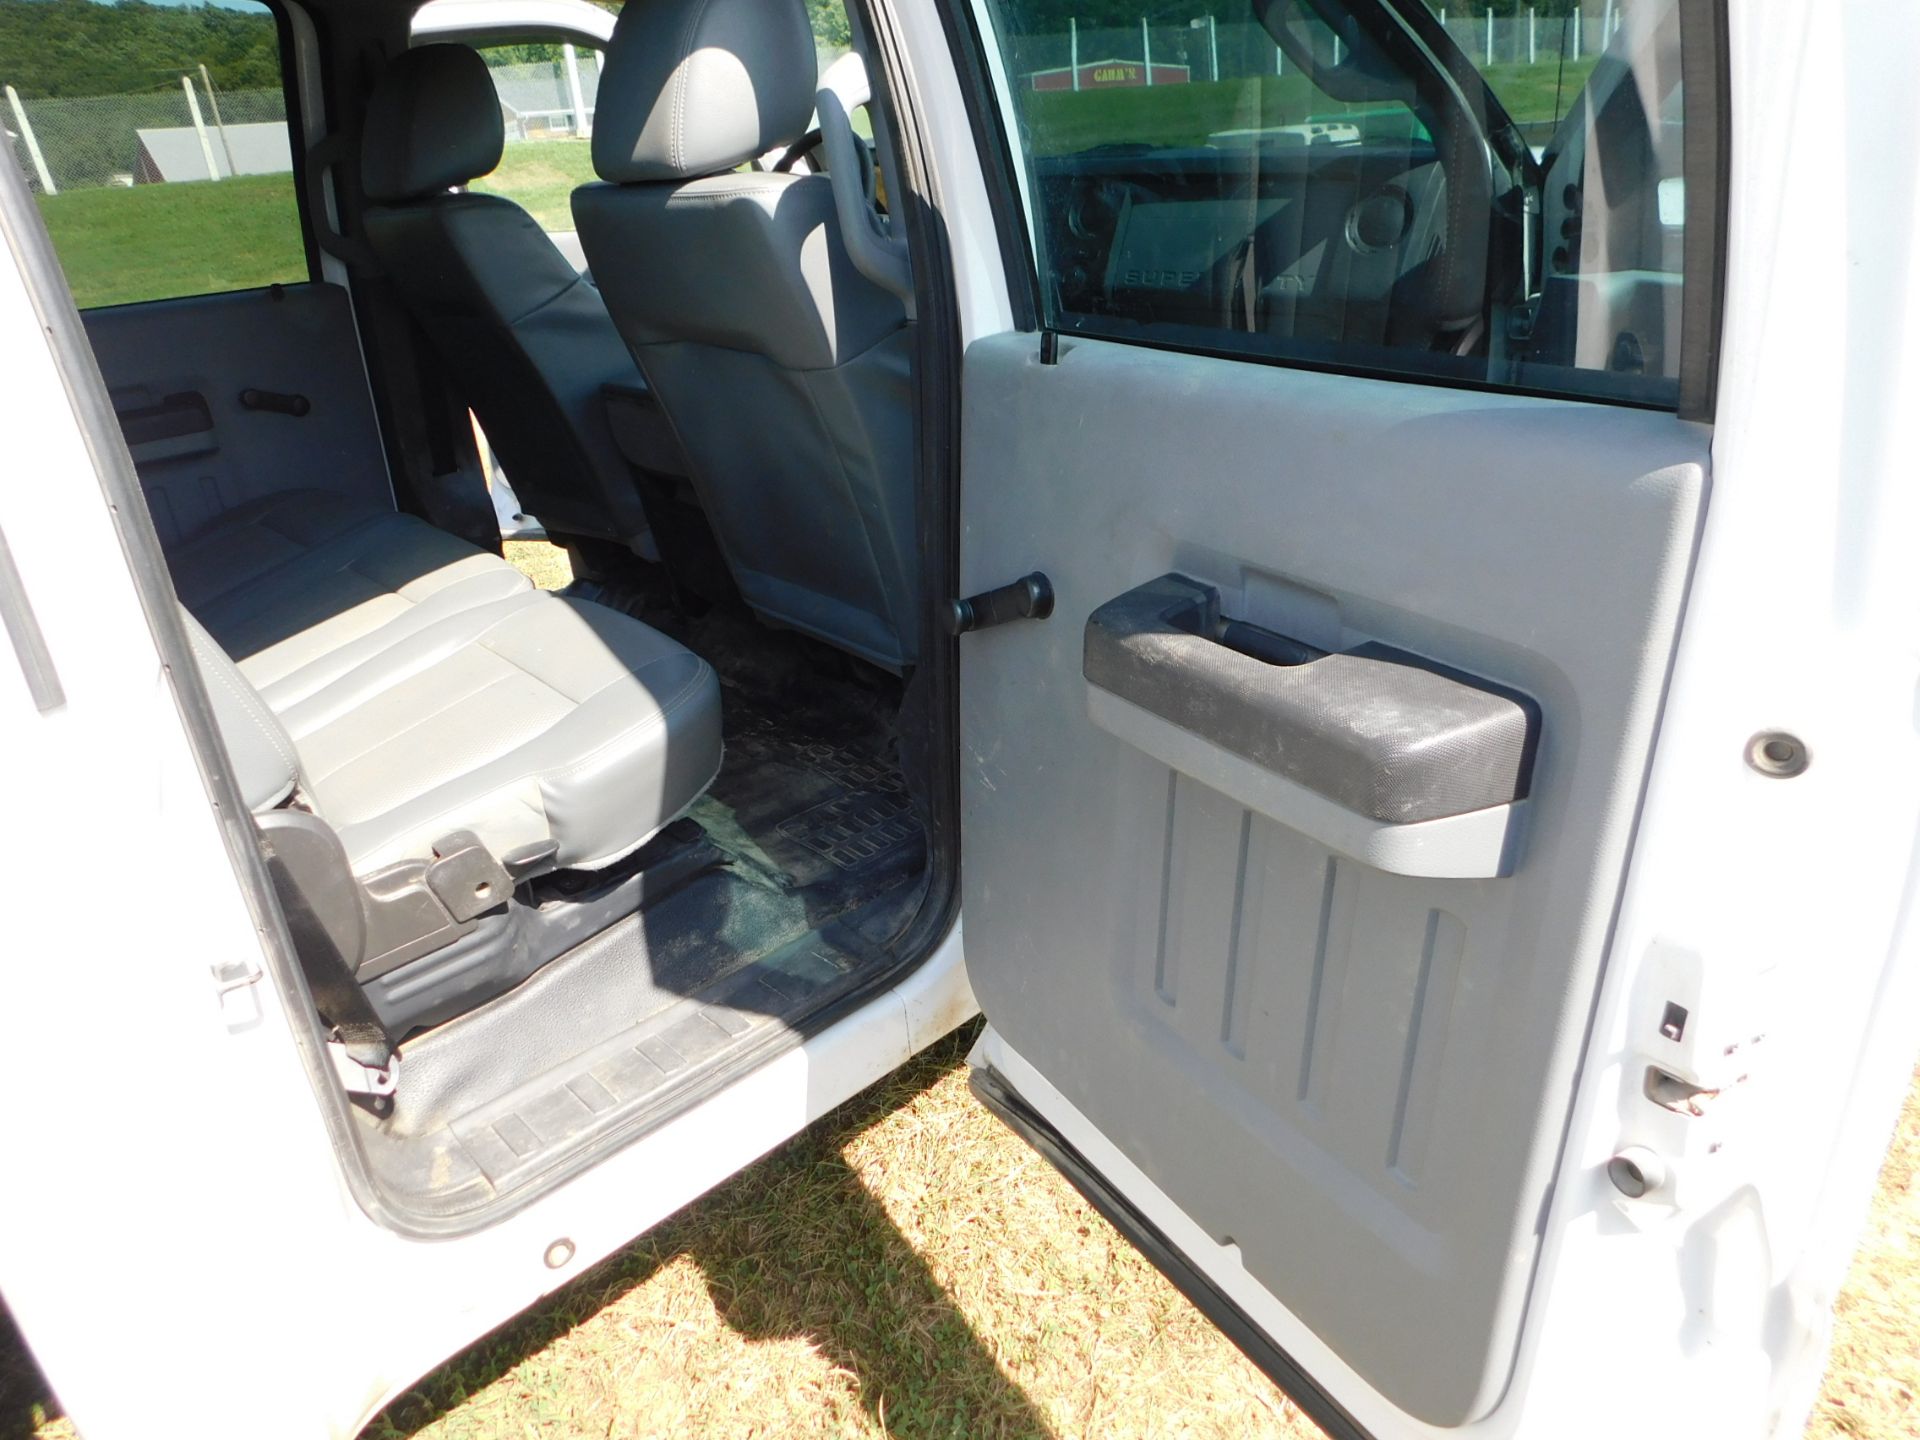 2013 Ford F250 Super Duty Service Truck, Crew Cab, Royal 8' Utility Bed, 4 WD, 153,573 Miles, AC, - Image 41 of 47